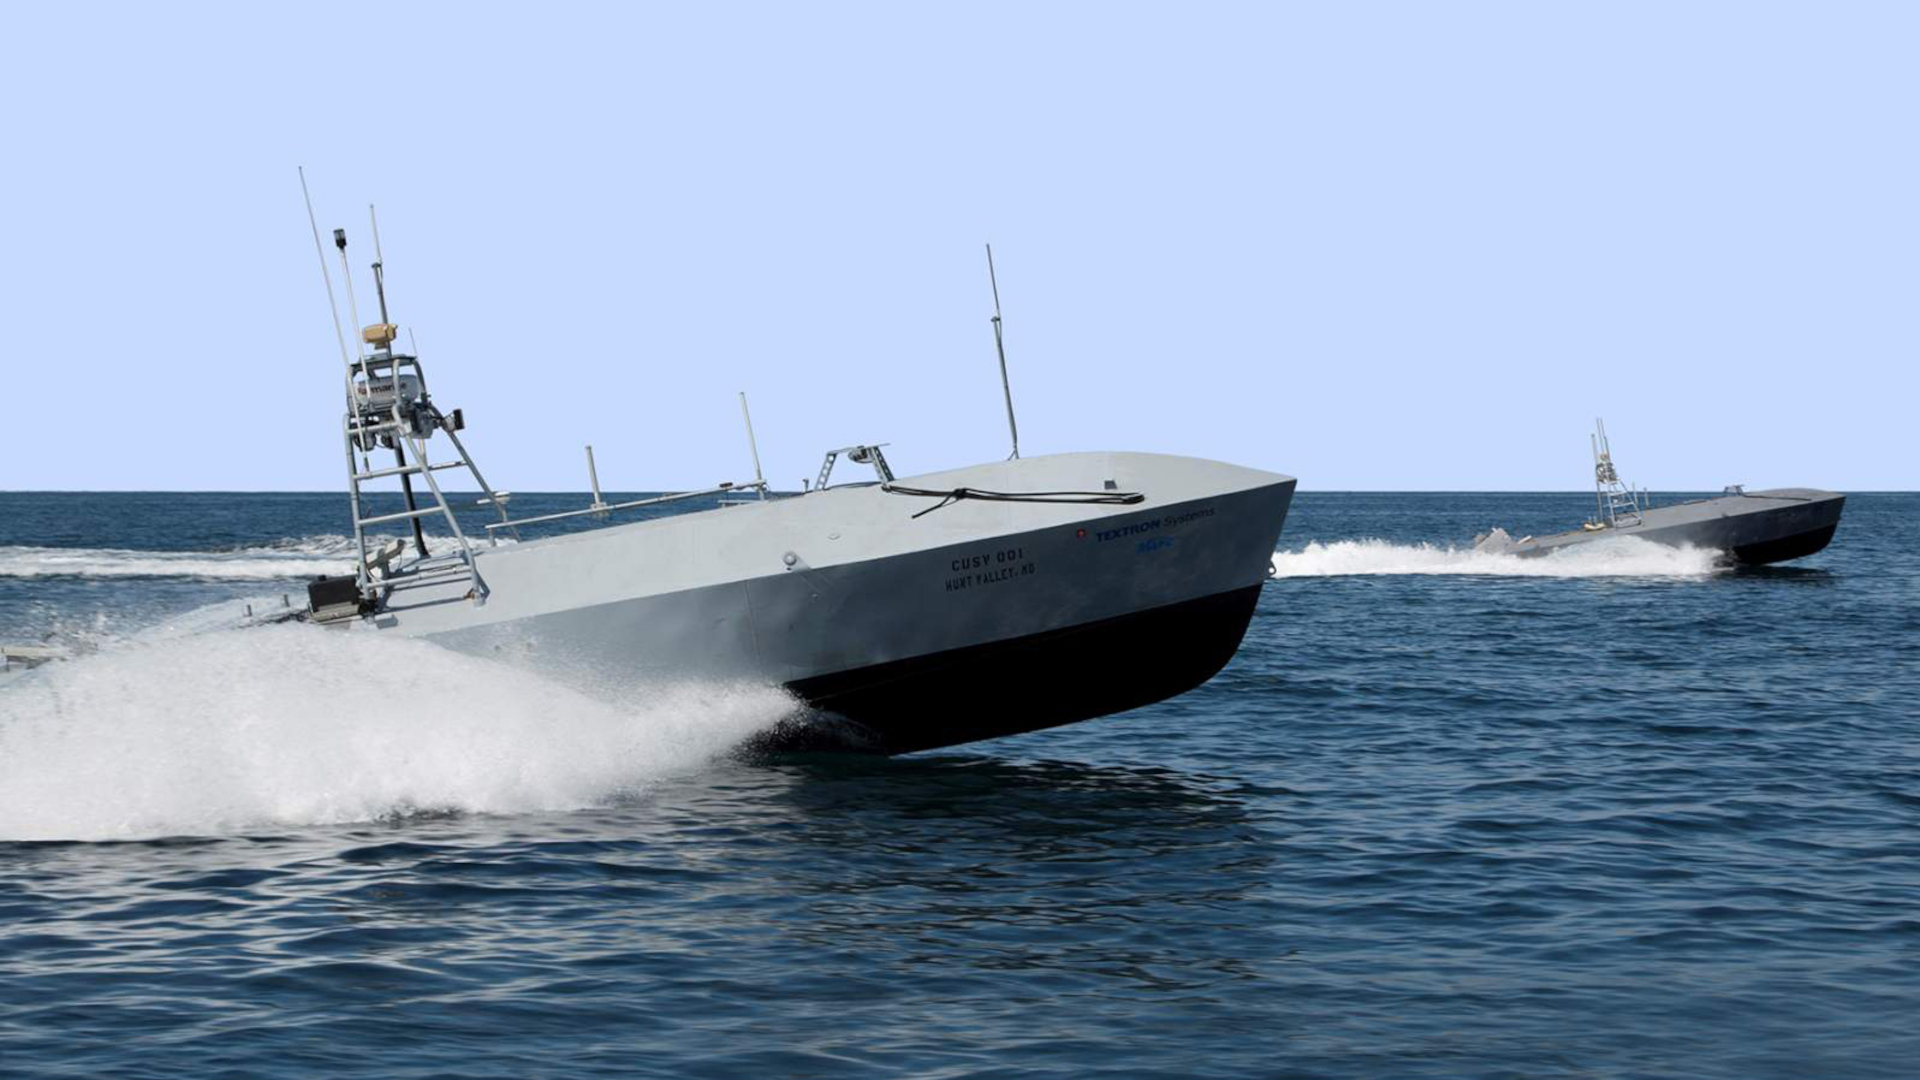 The Defense Innovation Unit has put out a call for proposals for low-cost "interceptor" drone boats that can operate in swarms to at least find and shadow targets of interest at sea.